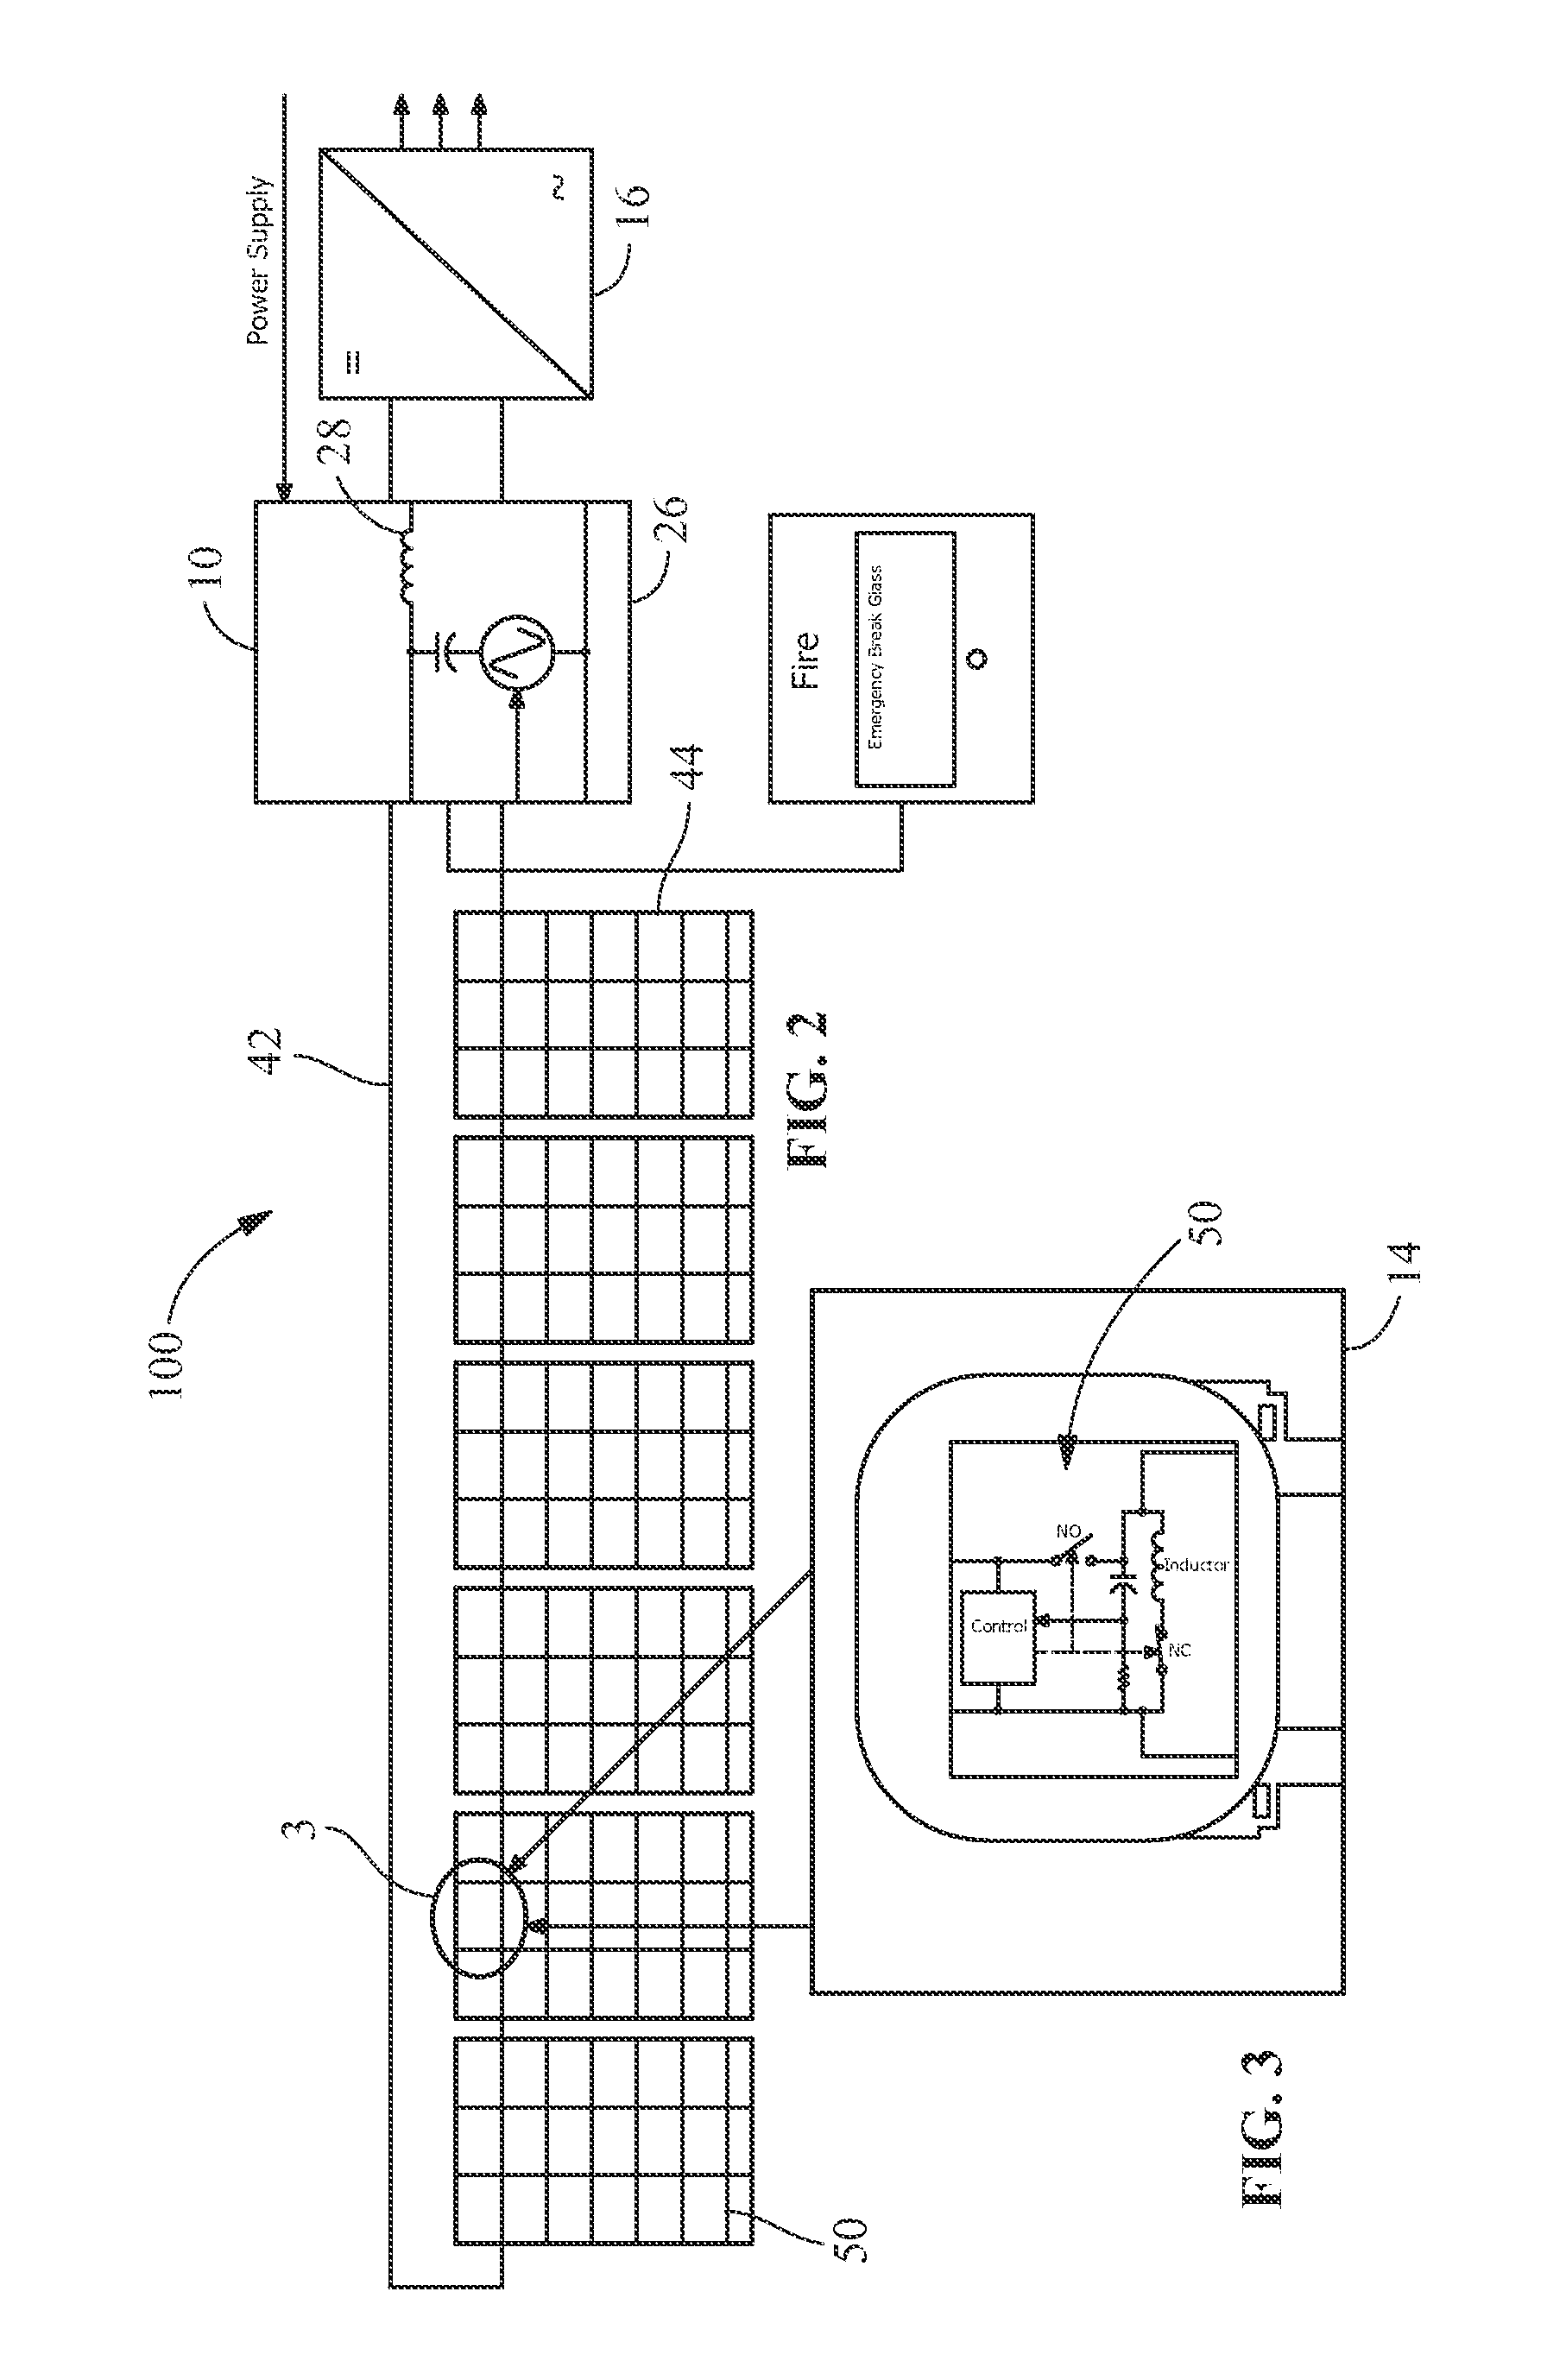 Shutdown system and method for photovoltaic system